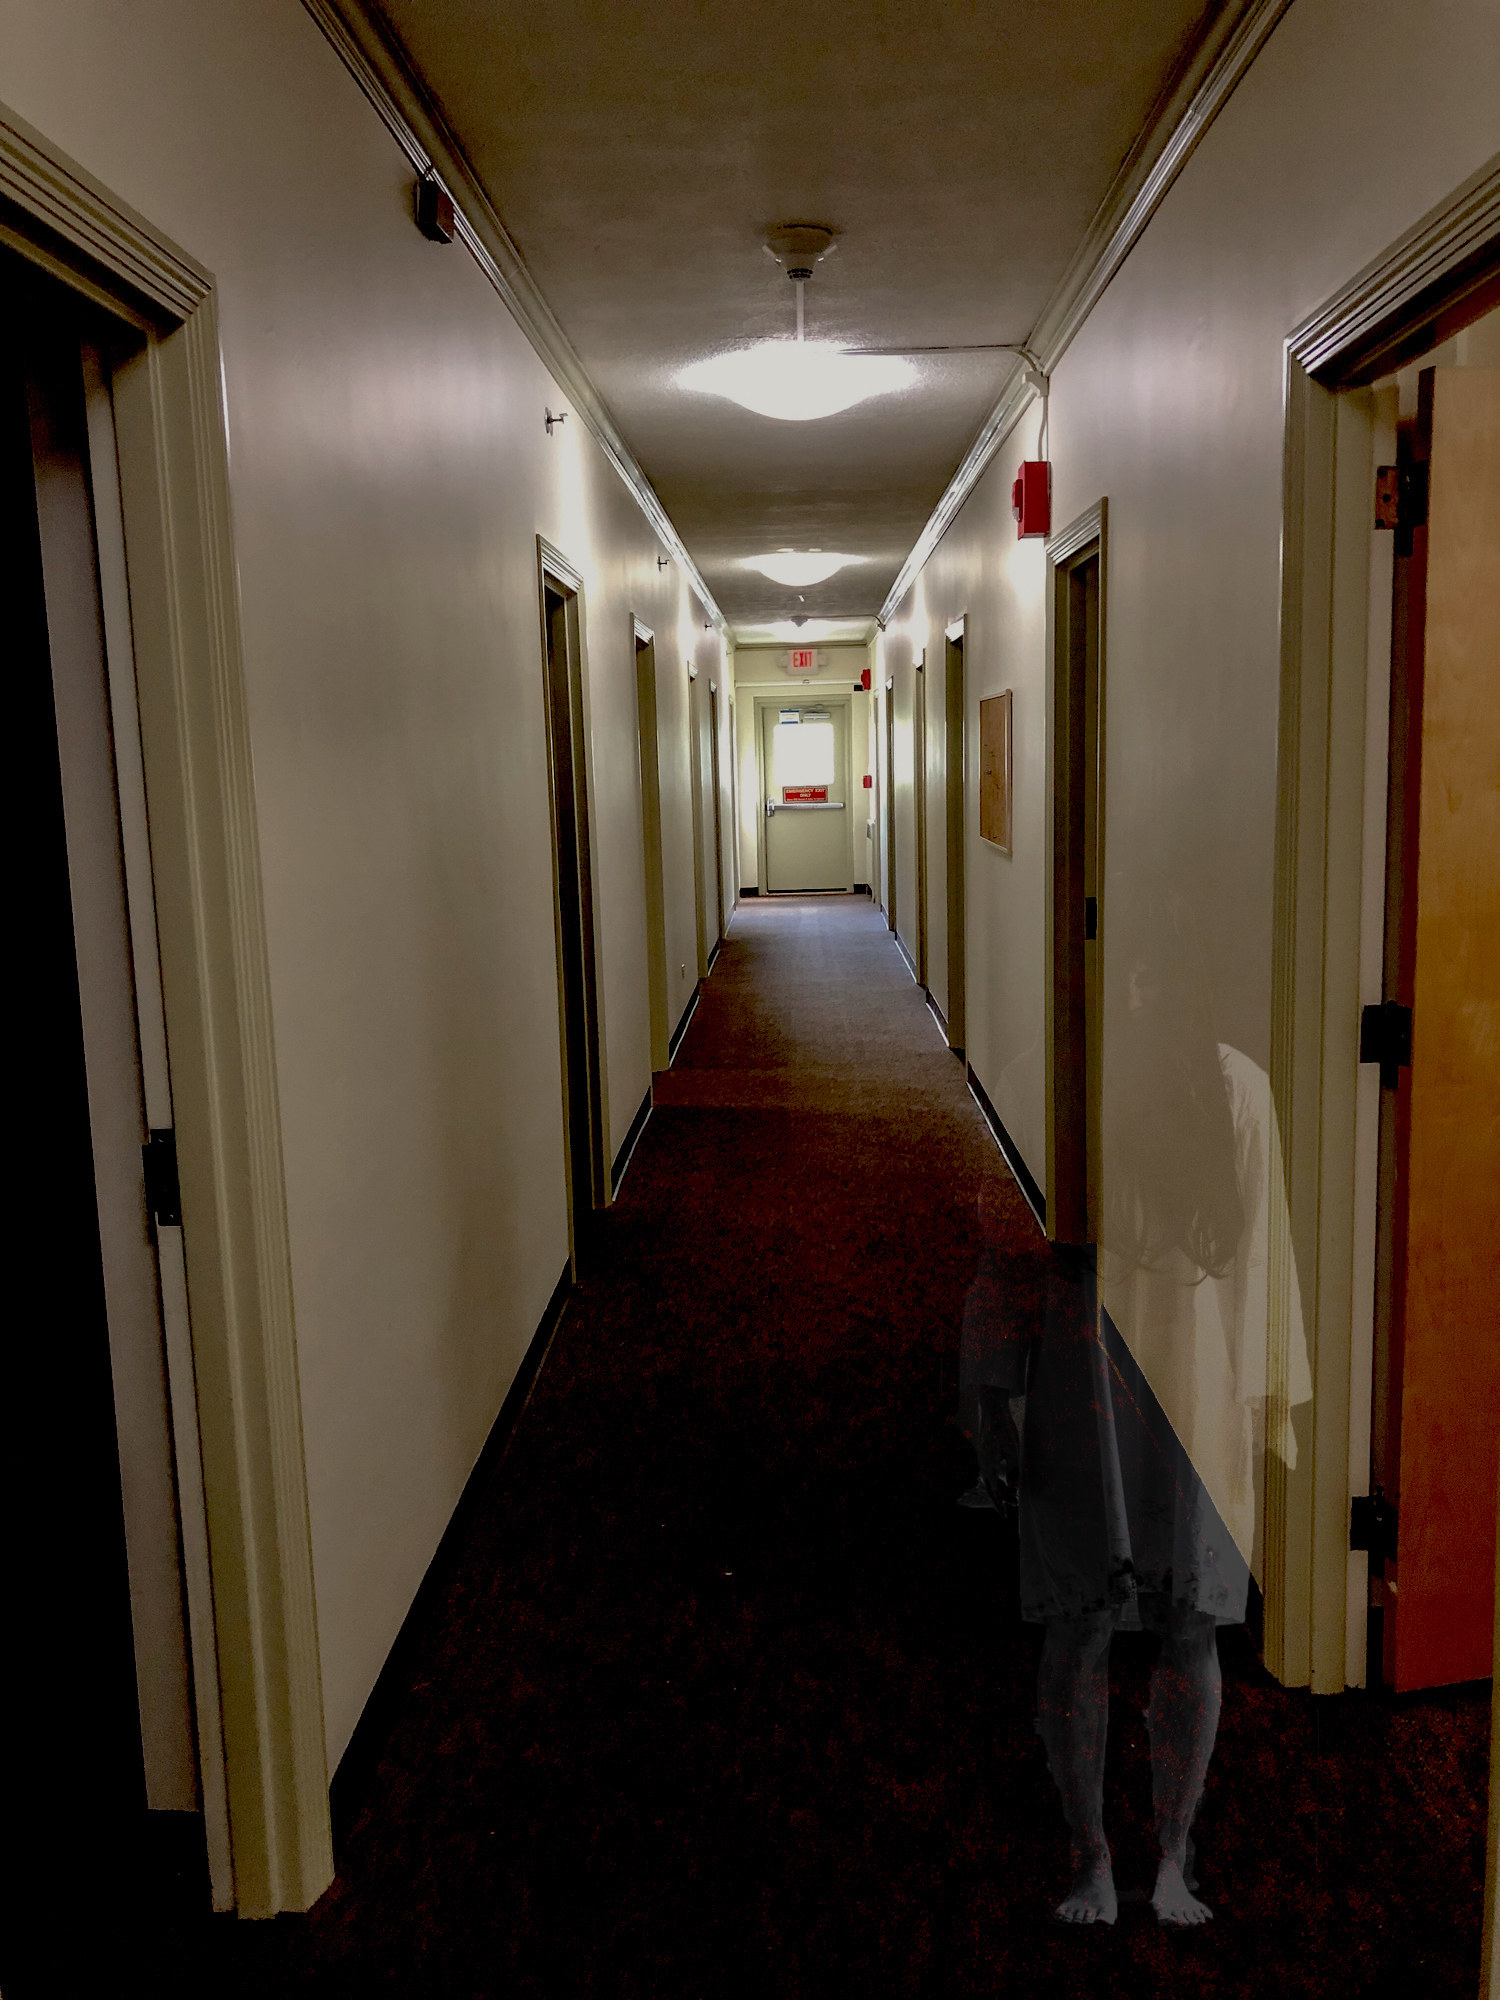 empty hallway with a ghost-like person standing creepily in the corner